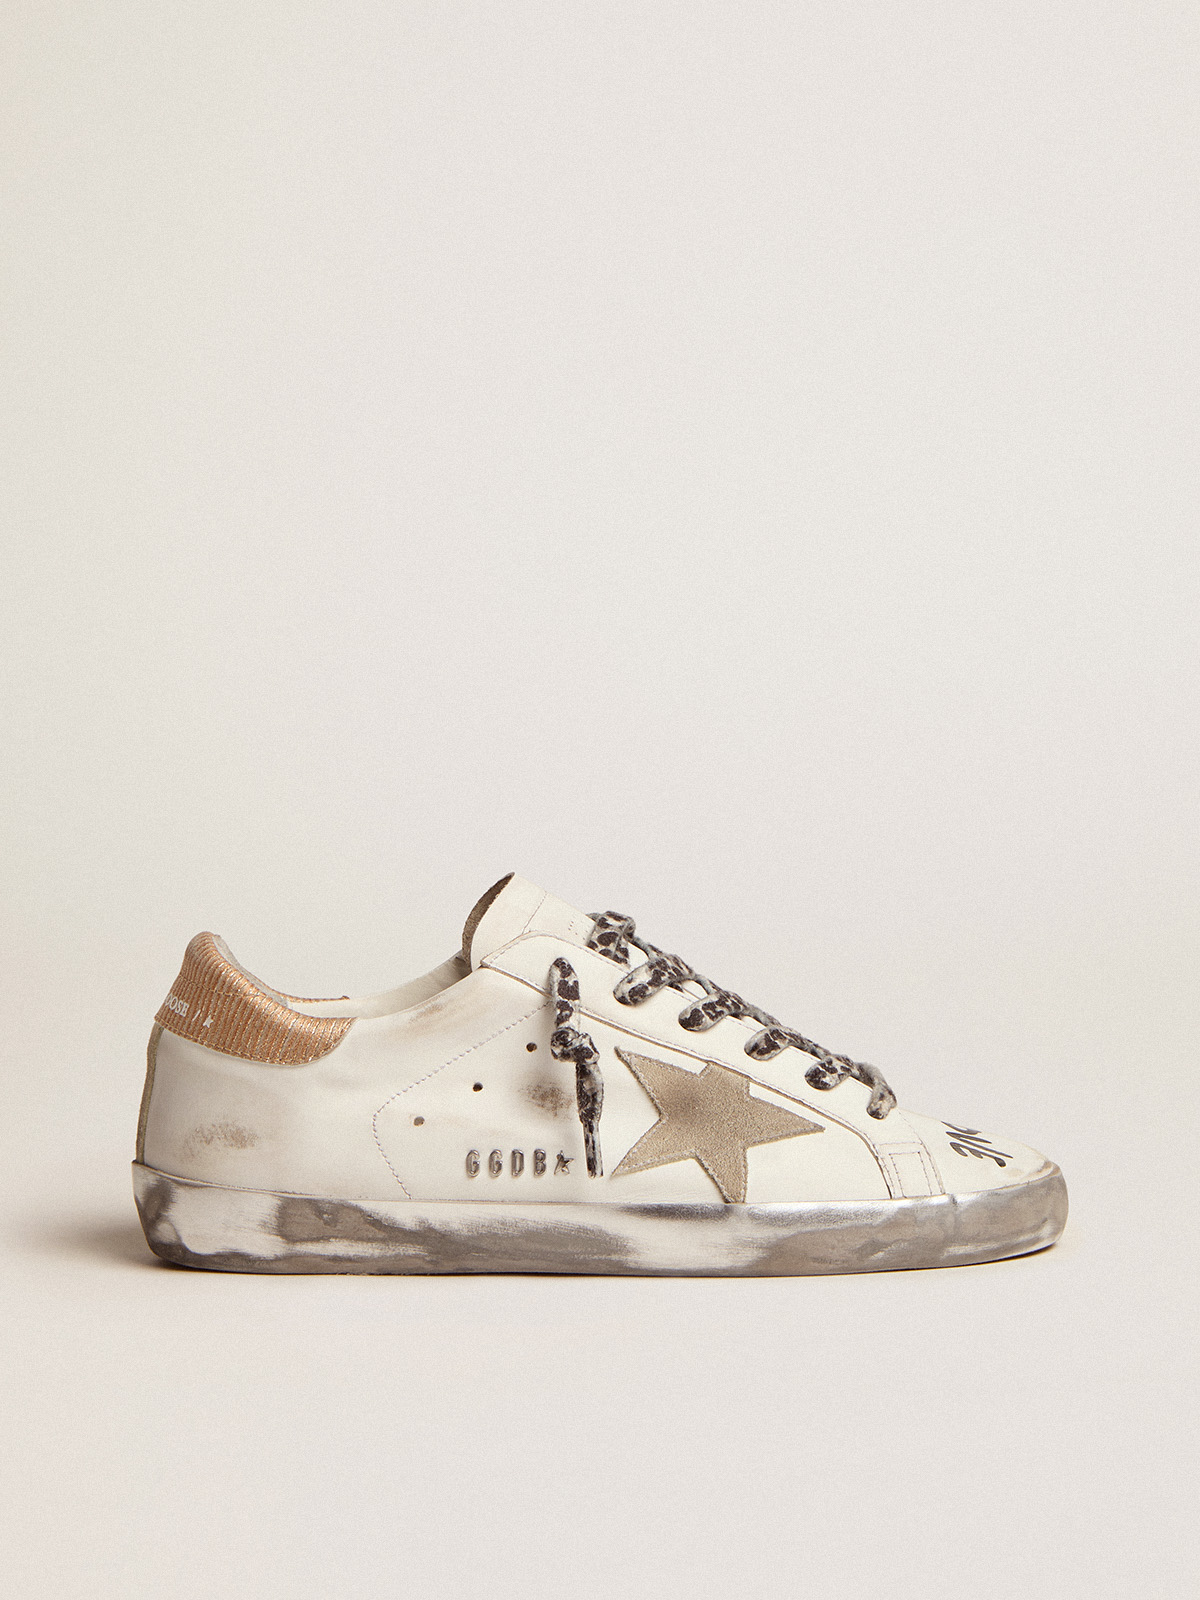 Women's Super-Star in white leather with gray suede star | Golden